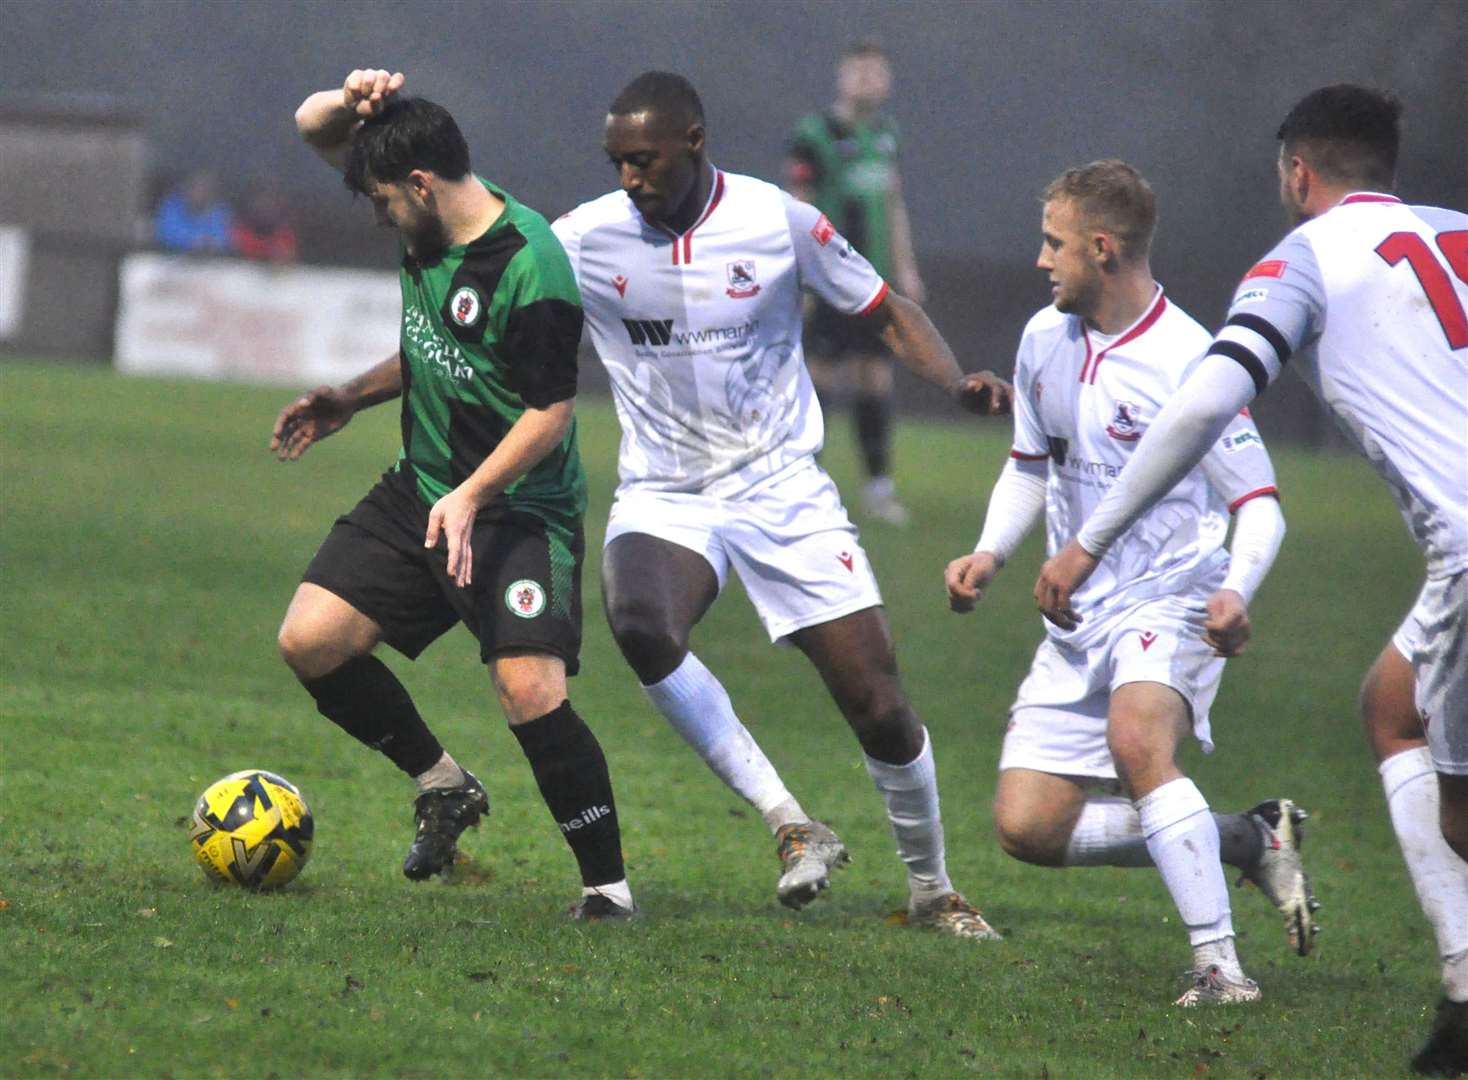 Ramsgate, in white, close down Burgess Hill in their 1-0 Isthmian South East victory on Saturday. Picture: Phil Dennett